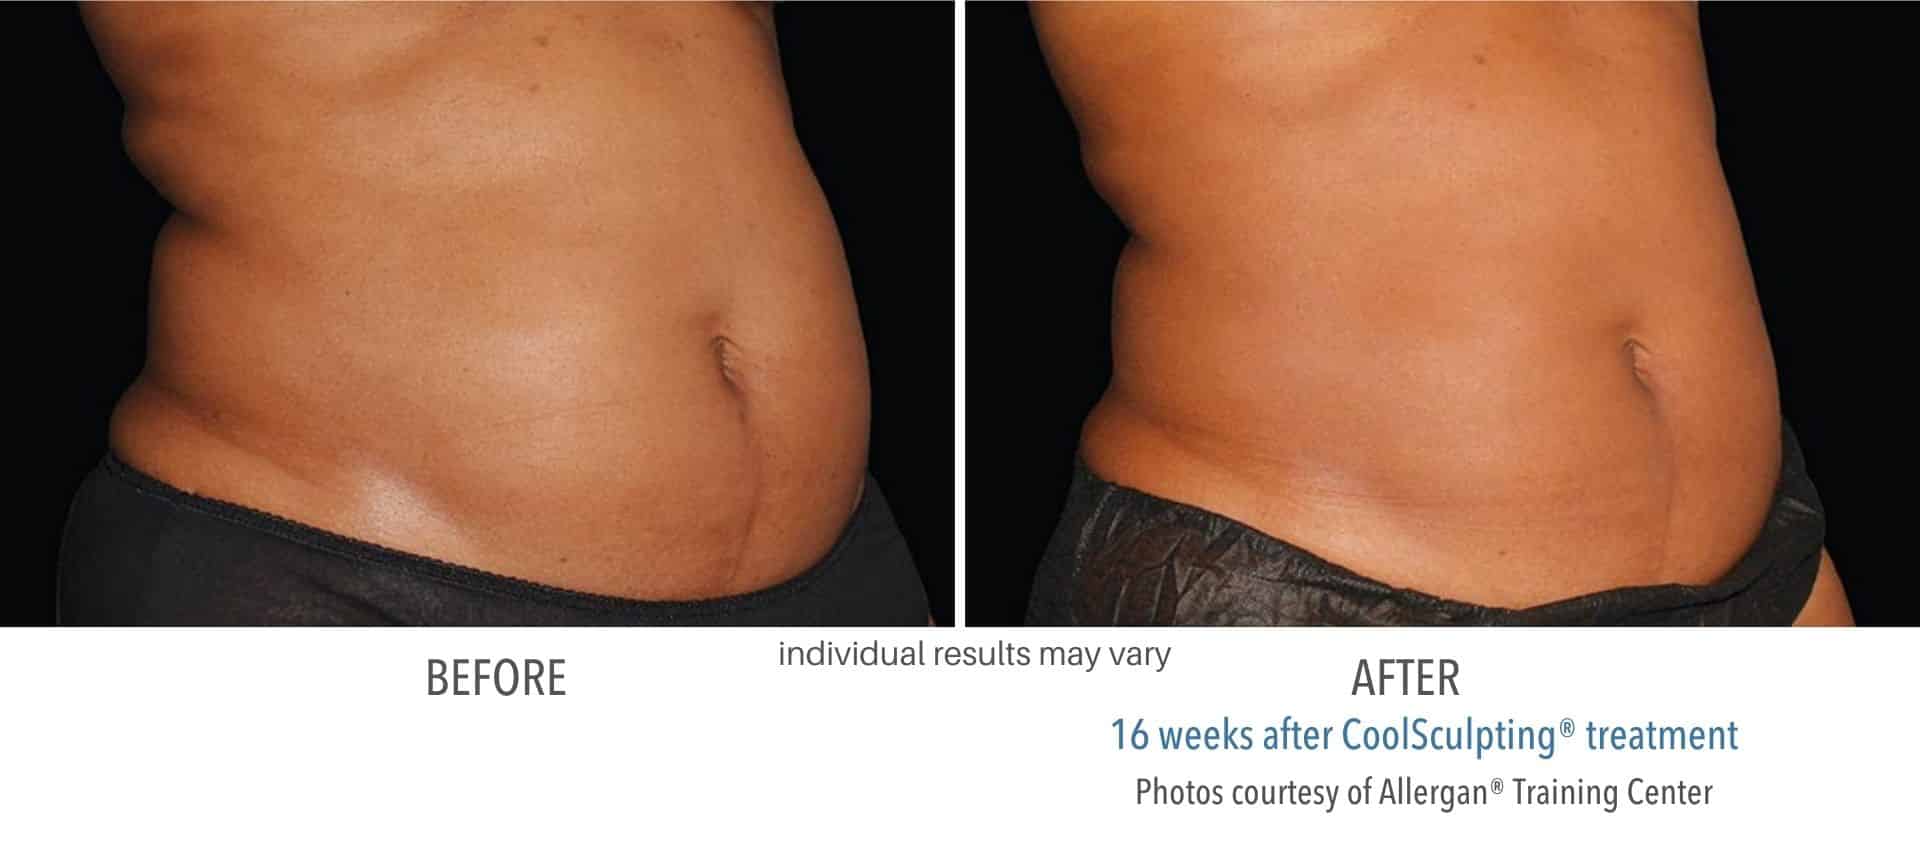 Coolsculpting abdomen before and after results.